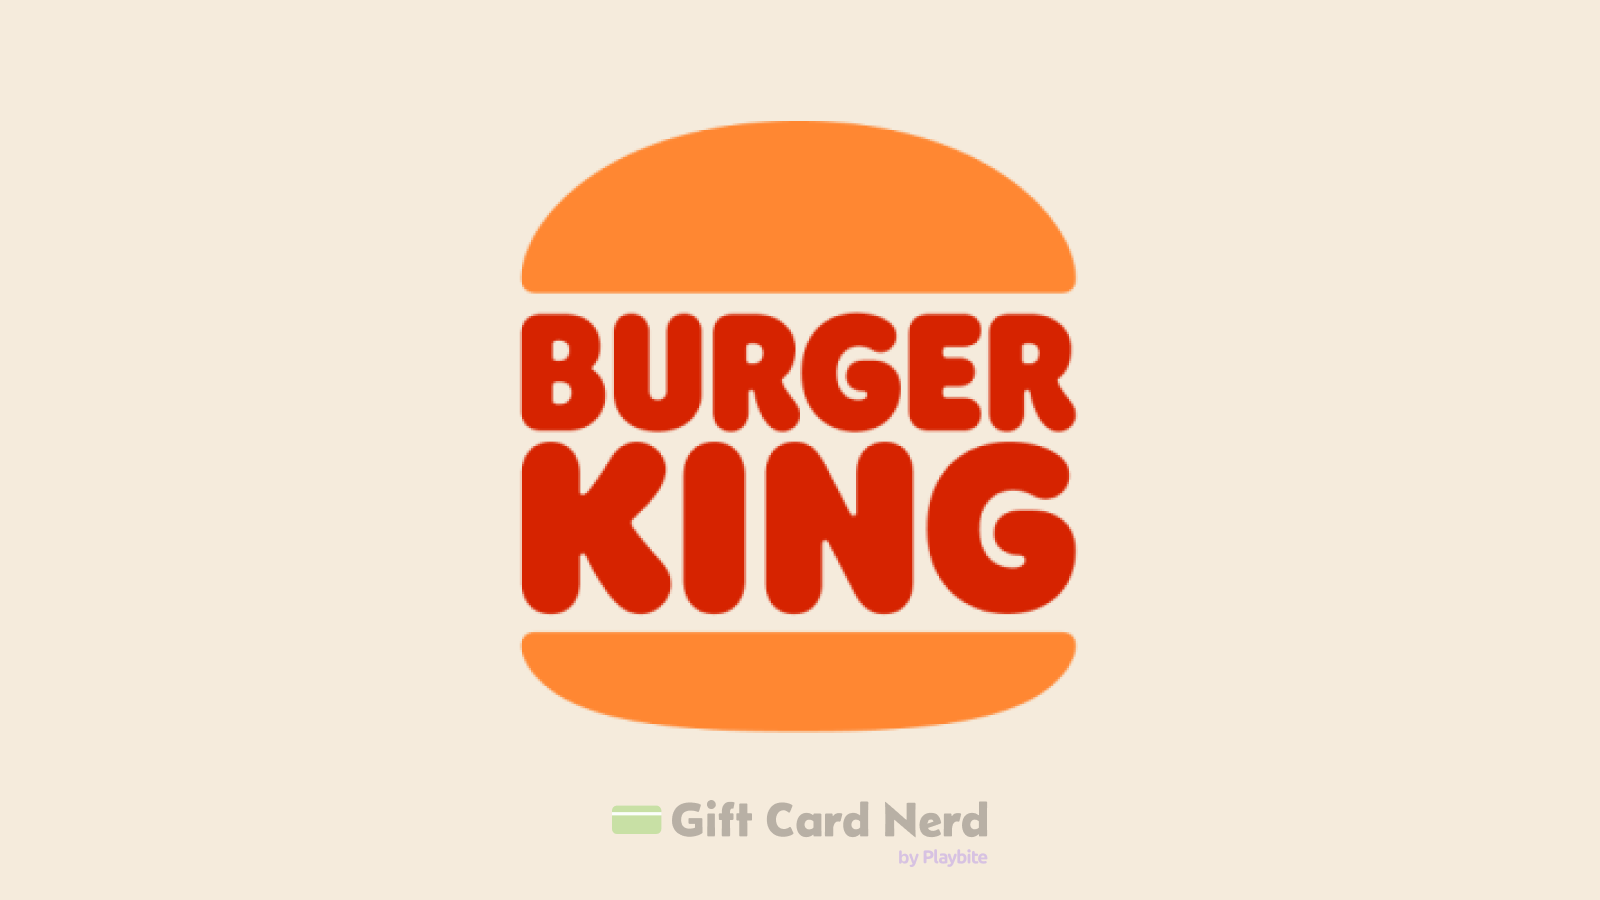 How to Check Your Burger King Gift Card Balance